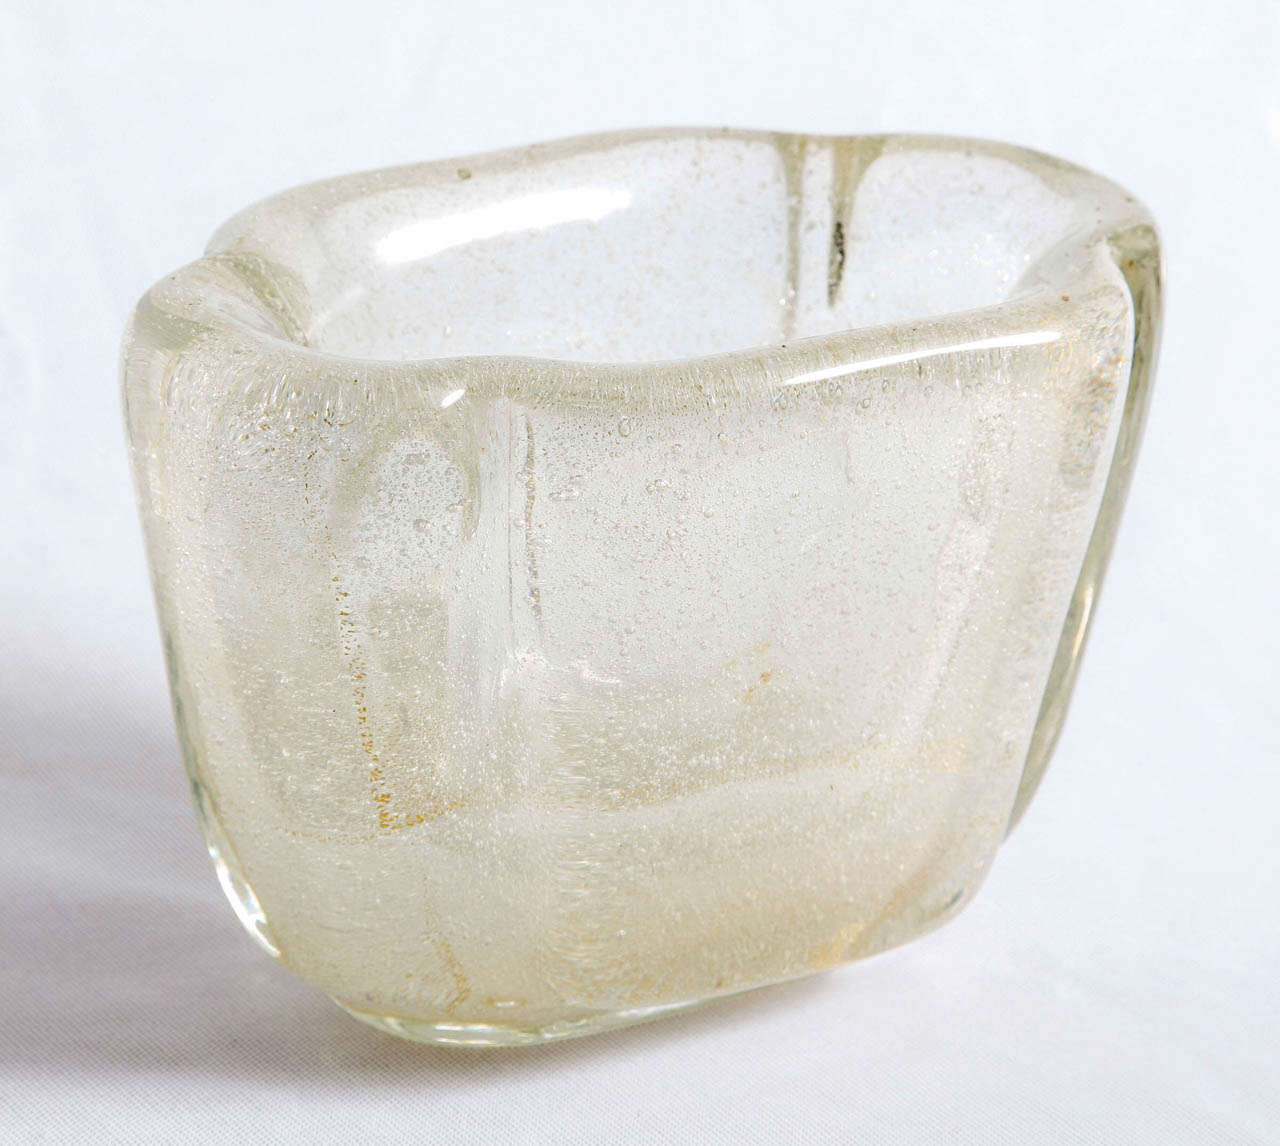 A 'Sommerso' vase designed by the Italian architect Carlo Scarpa (1906-1978) and exceuted by Venini, glassworks located in Murano (I), circa 1935. Model number 3569. Four lines acid-stencilled marks under the base (see image 6)